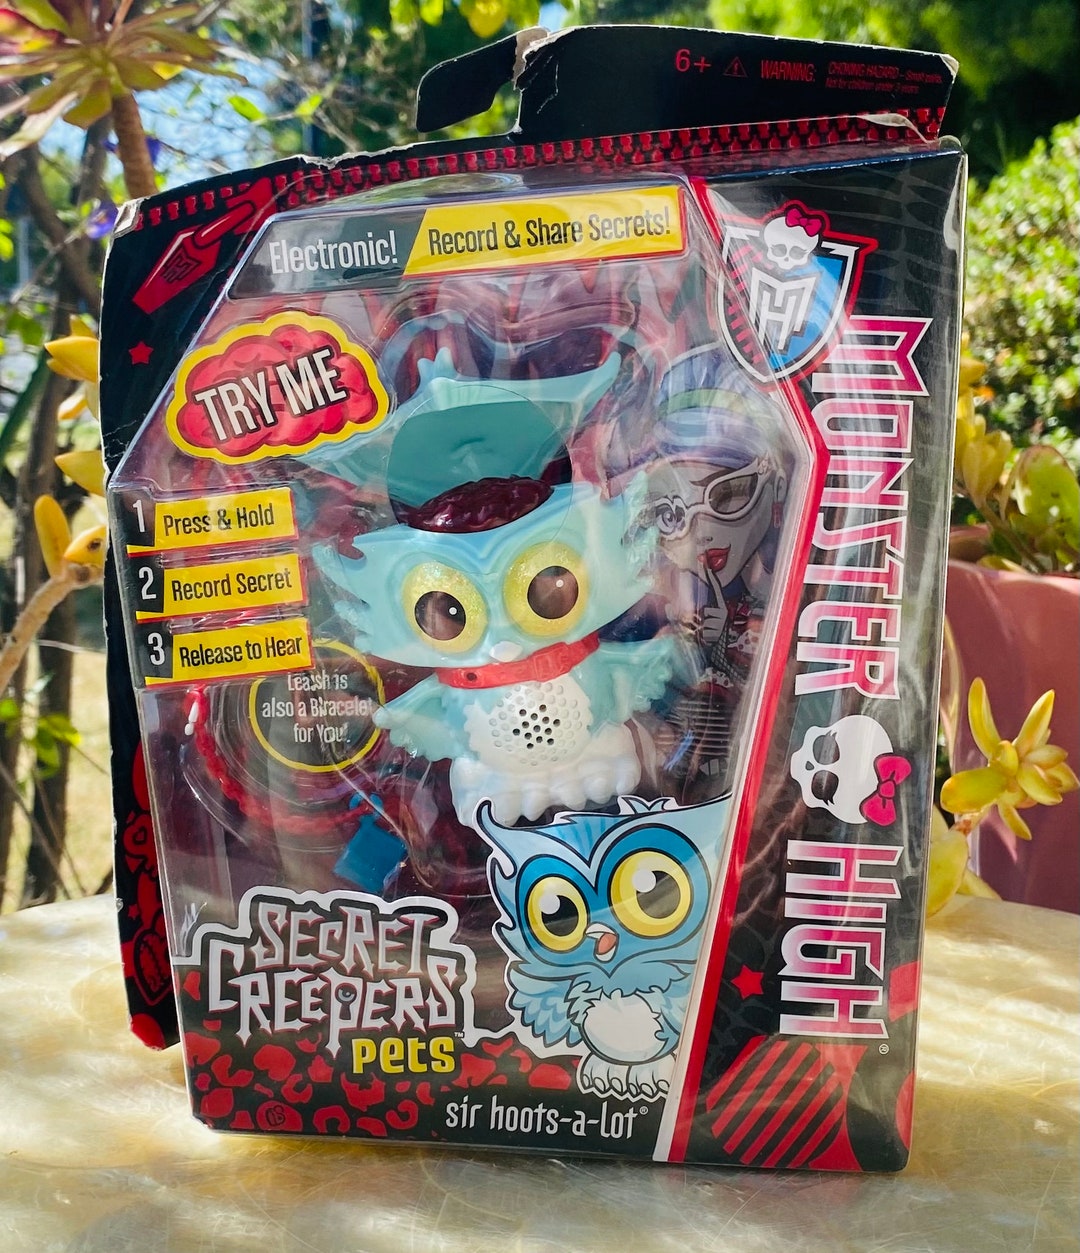 Monster High Secret Creepers Pet Sir Hoots-a-Lot Toy Owl - Etsy 日本